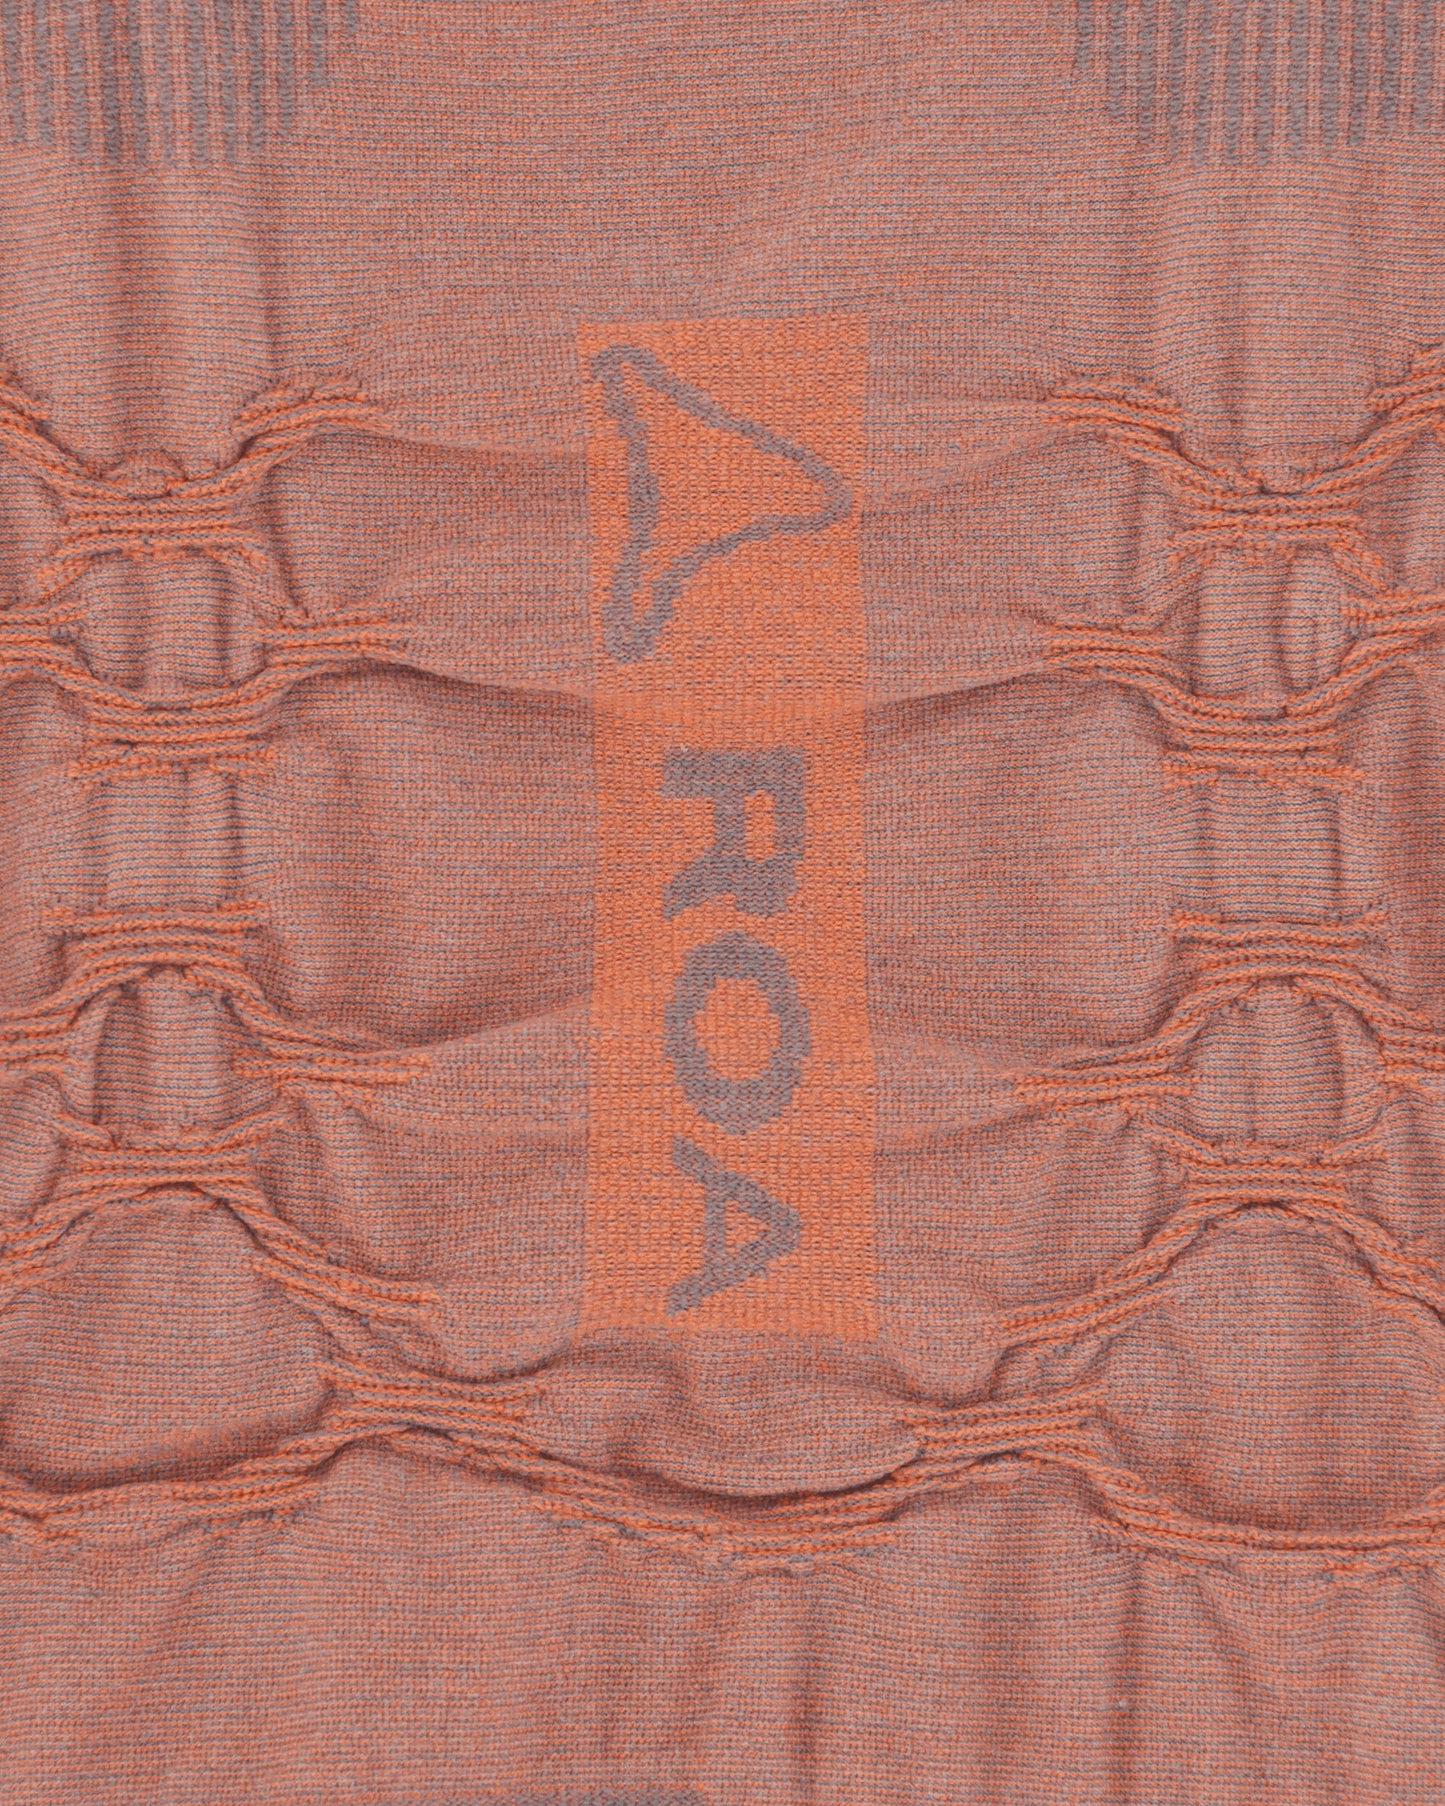 ROA Neck Warmer Seamless Orange Gloves and Scarves Scarves and Warmneck RBMW229FA17 ORG0001